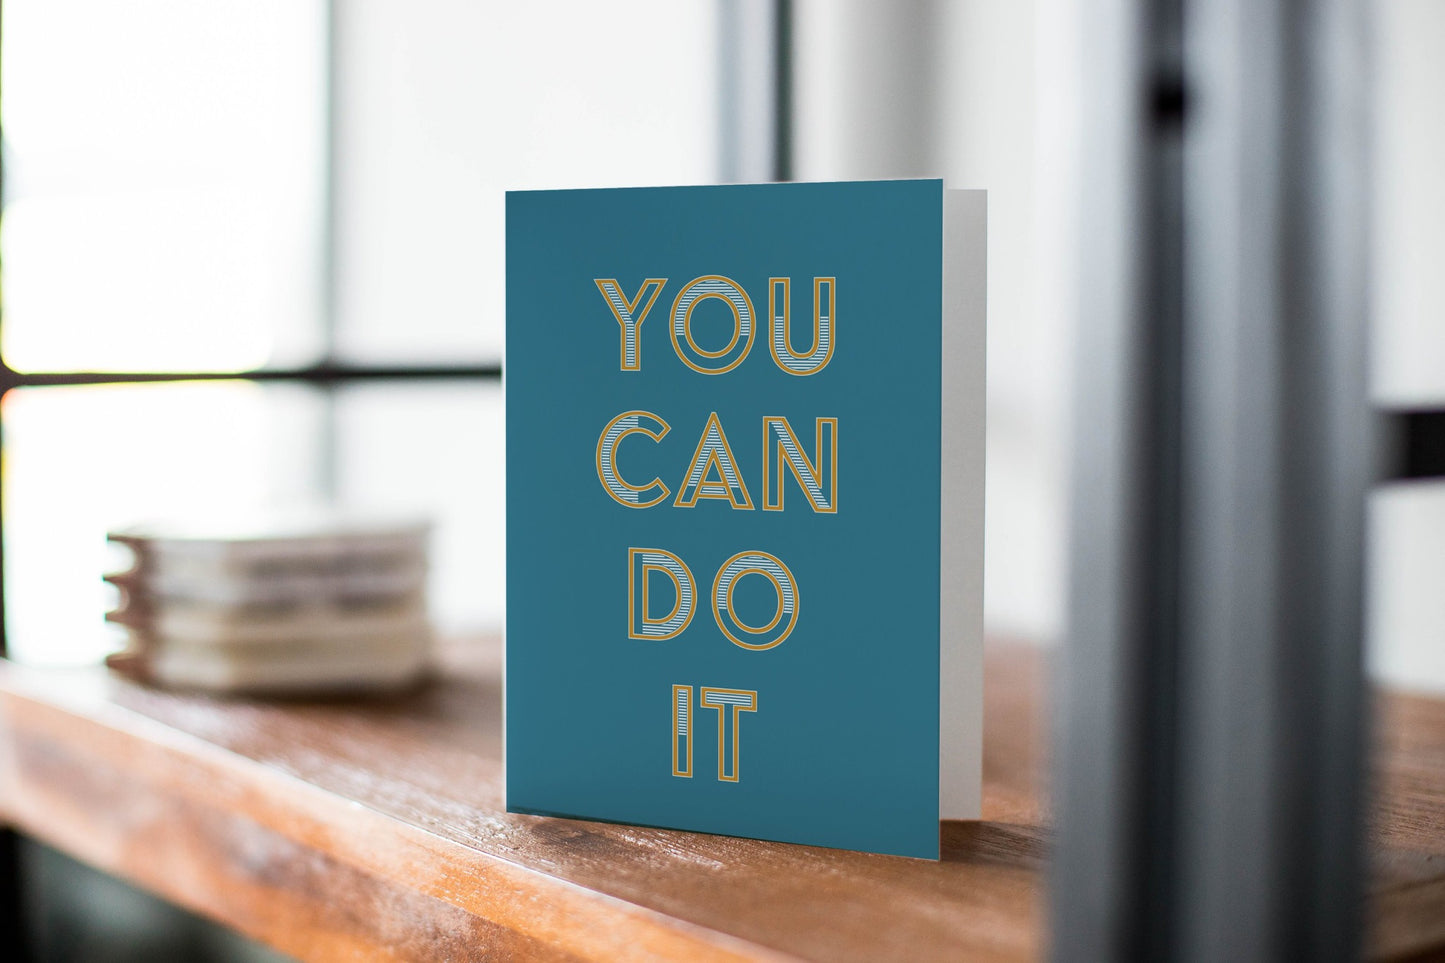 You can do it!: Encouragement Greeting Card.